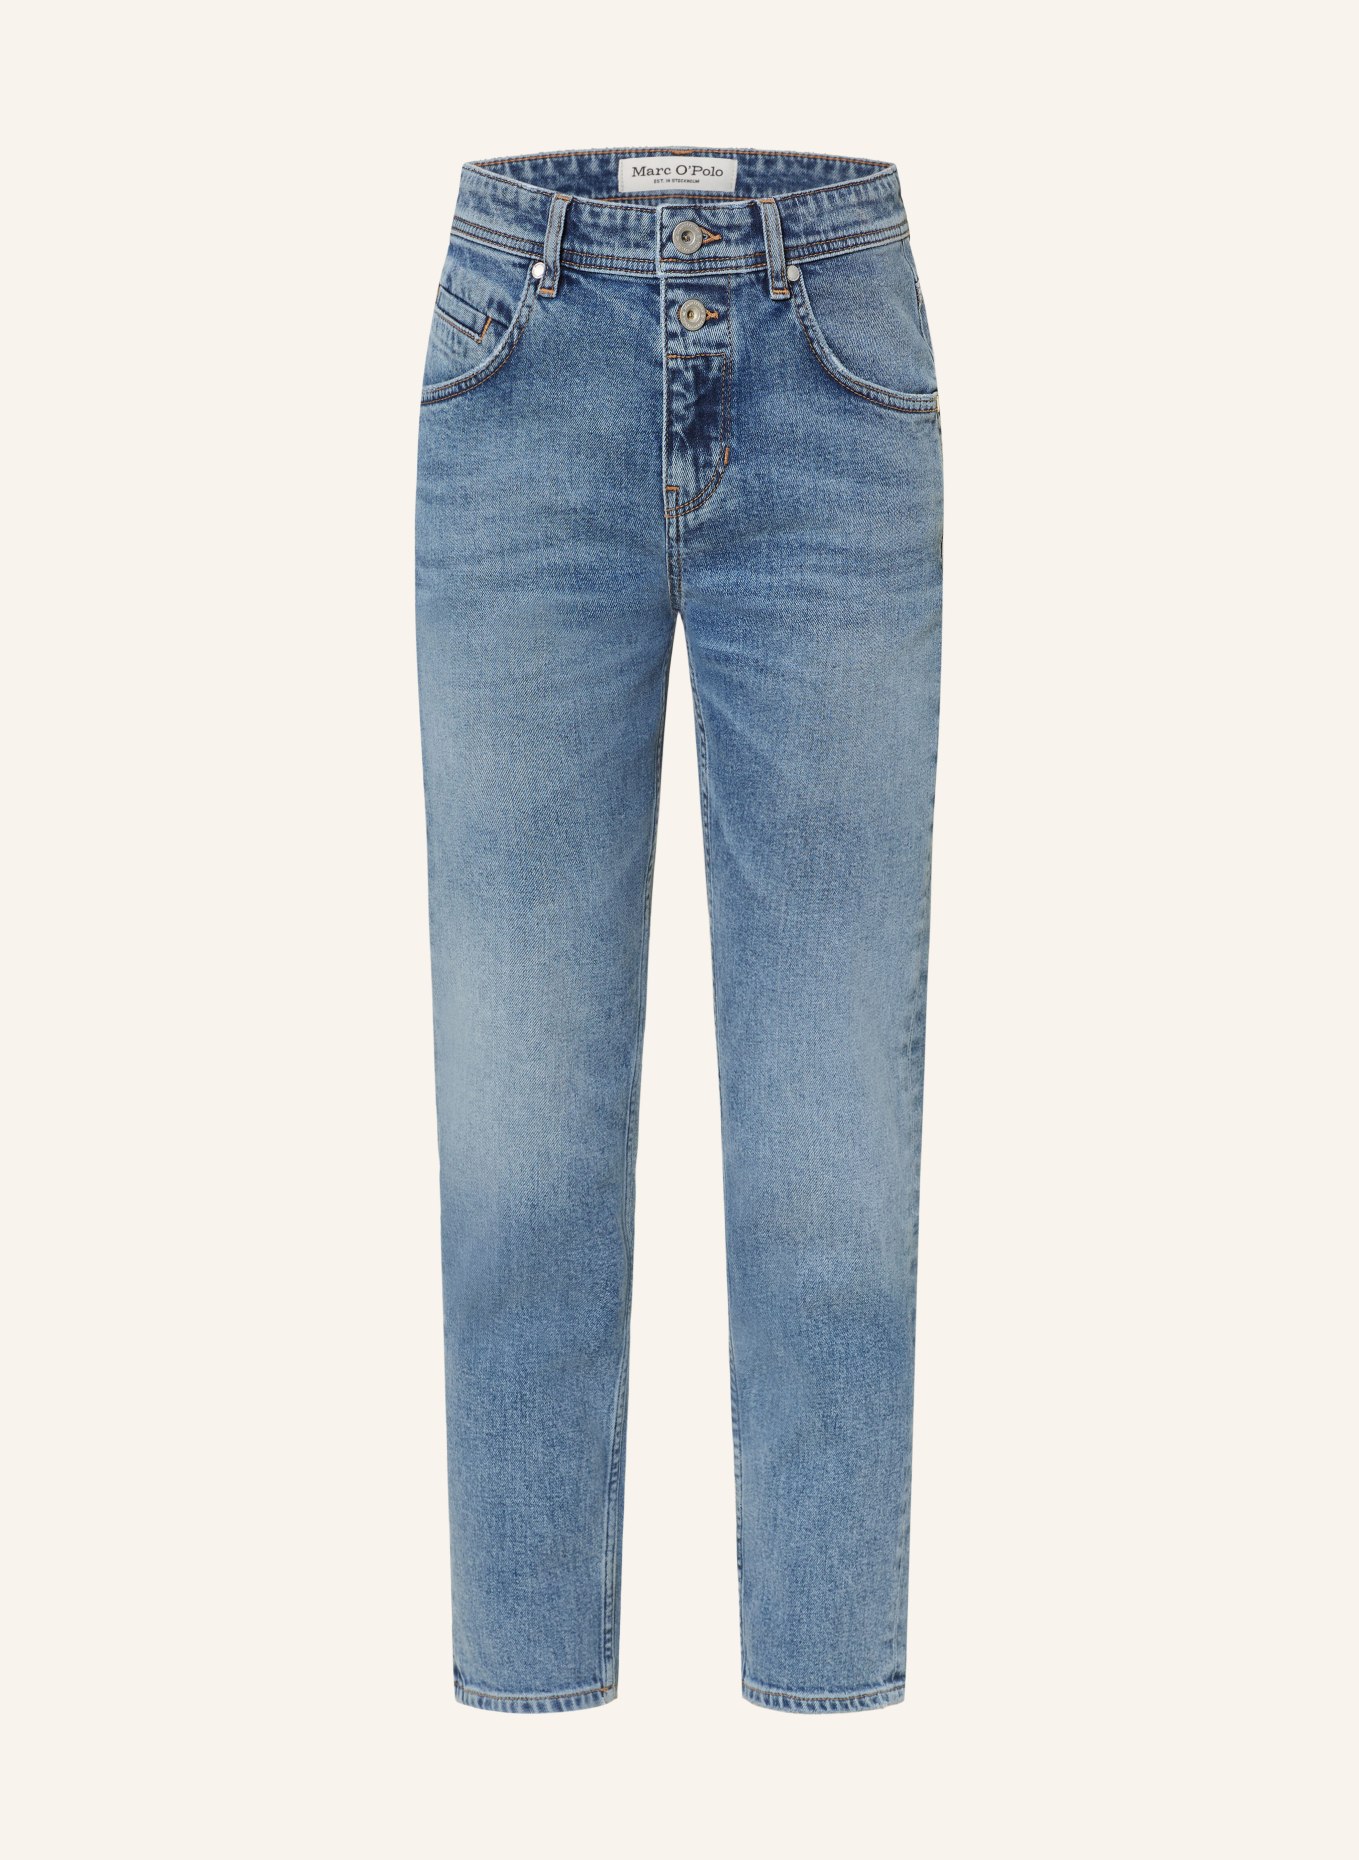 Marc O'Polo 7/8-Jeans THEDA, Farbe: 041 Sustainable clean blue wash (Bild 1)